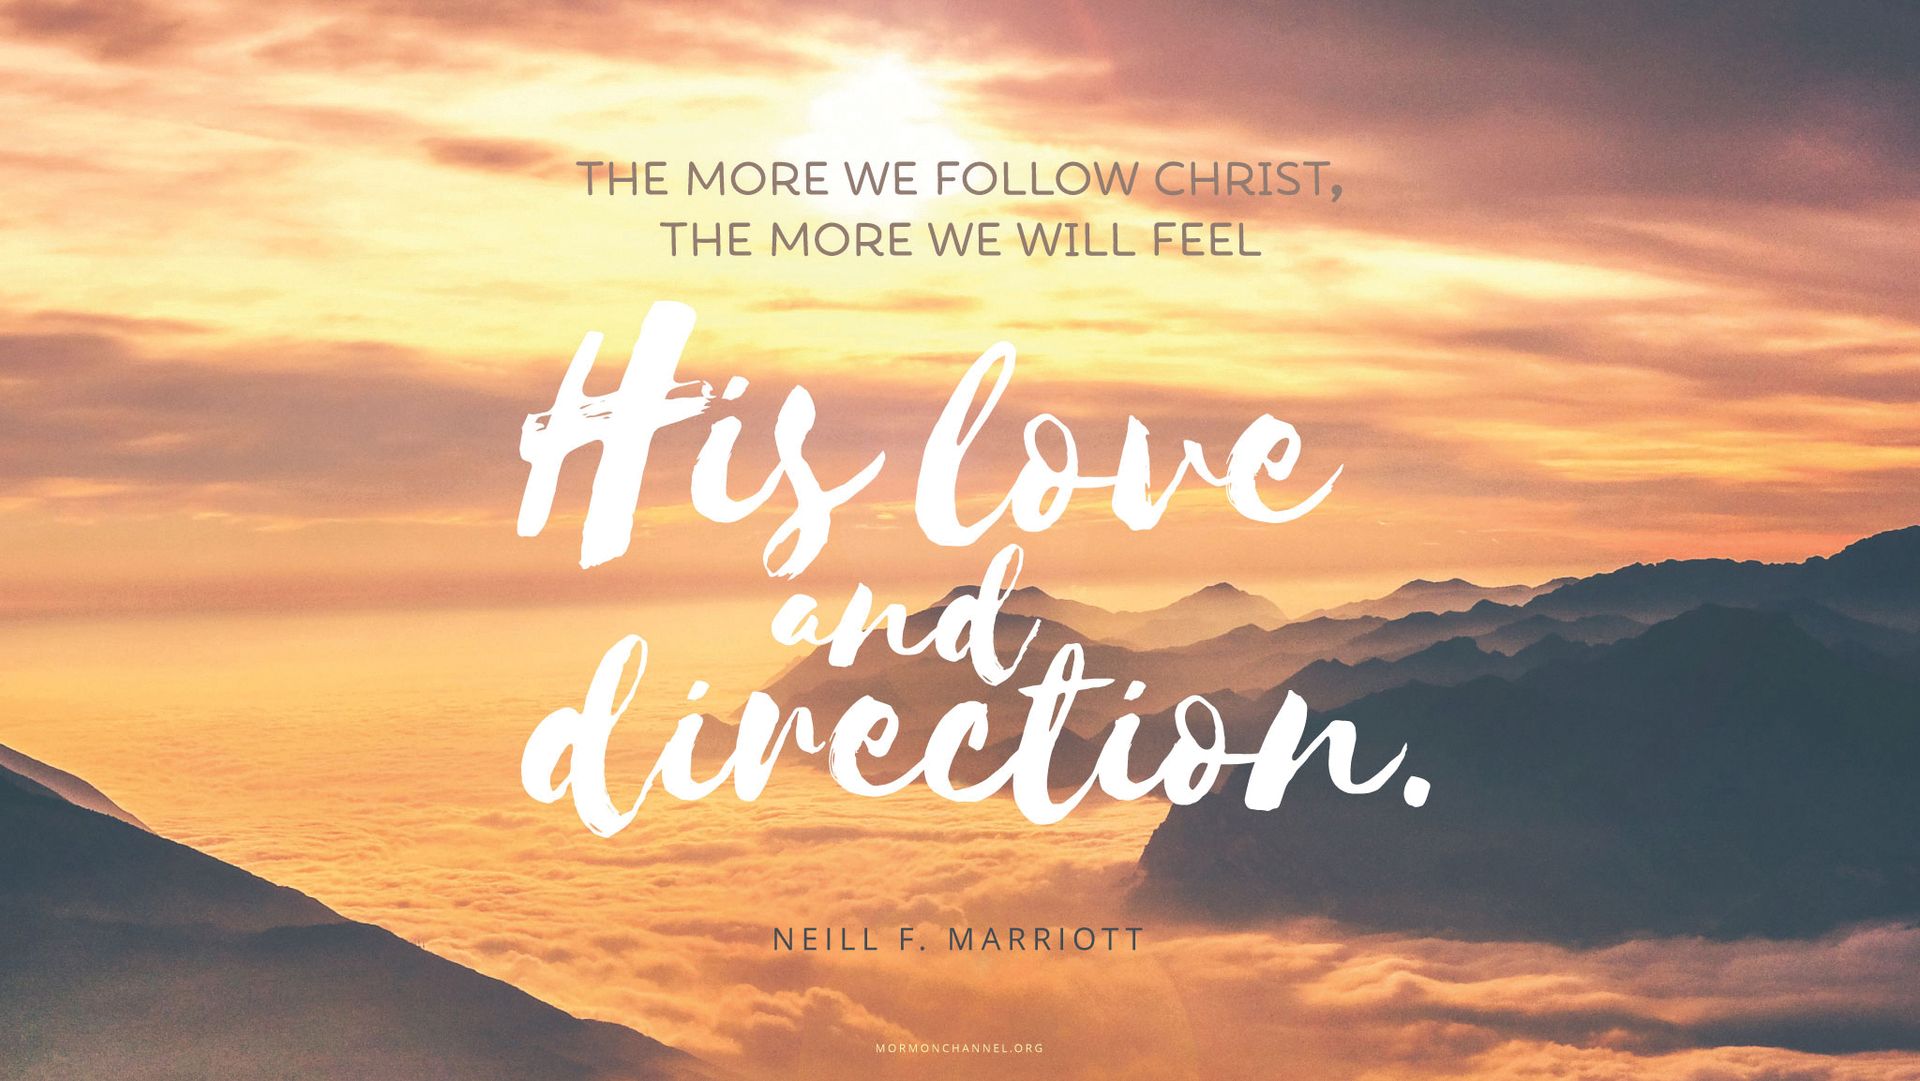 “The more we follow Christ, the more we will feel His love and direction.”—Sister Neill F. Marriott, “What Shall We Do?” © undefined ipCode 1.